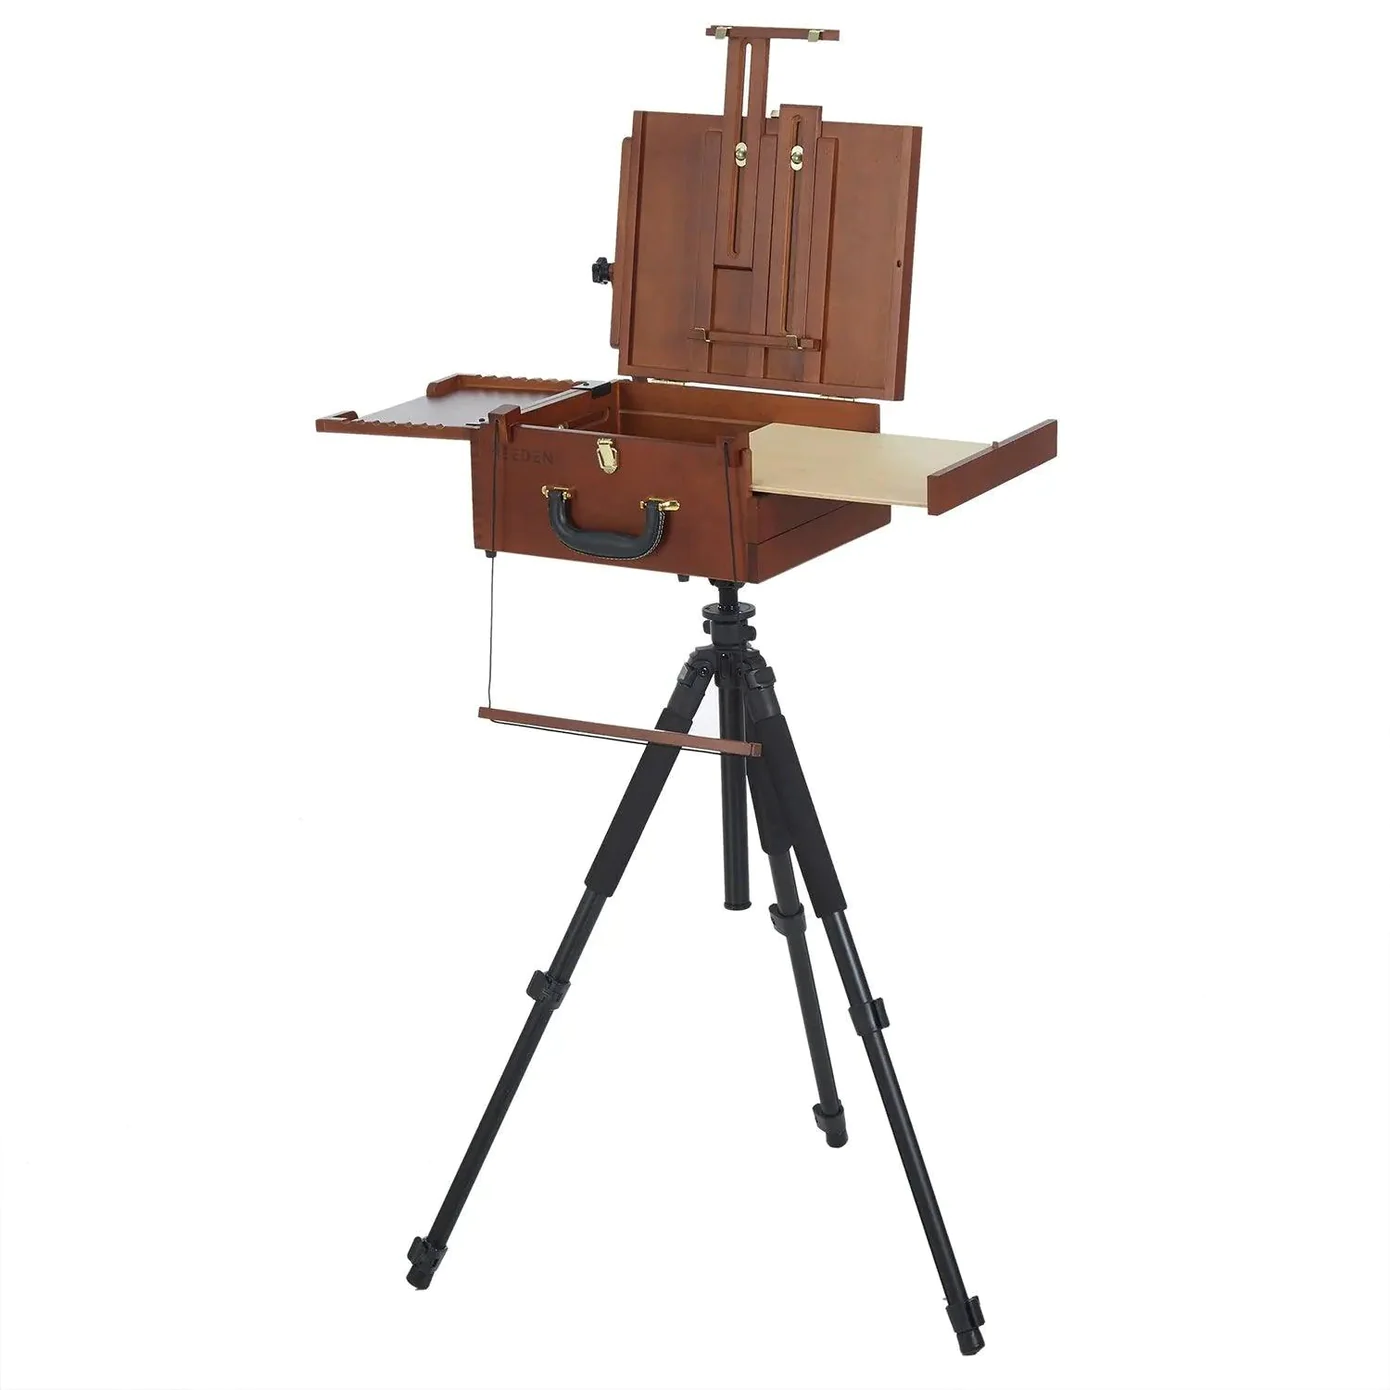 Extra 11 Top Canvas Panel Holder - STRADA Easel